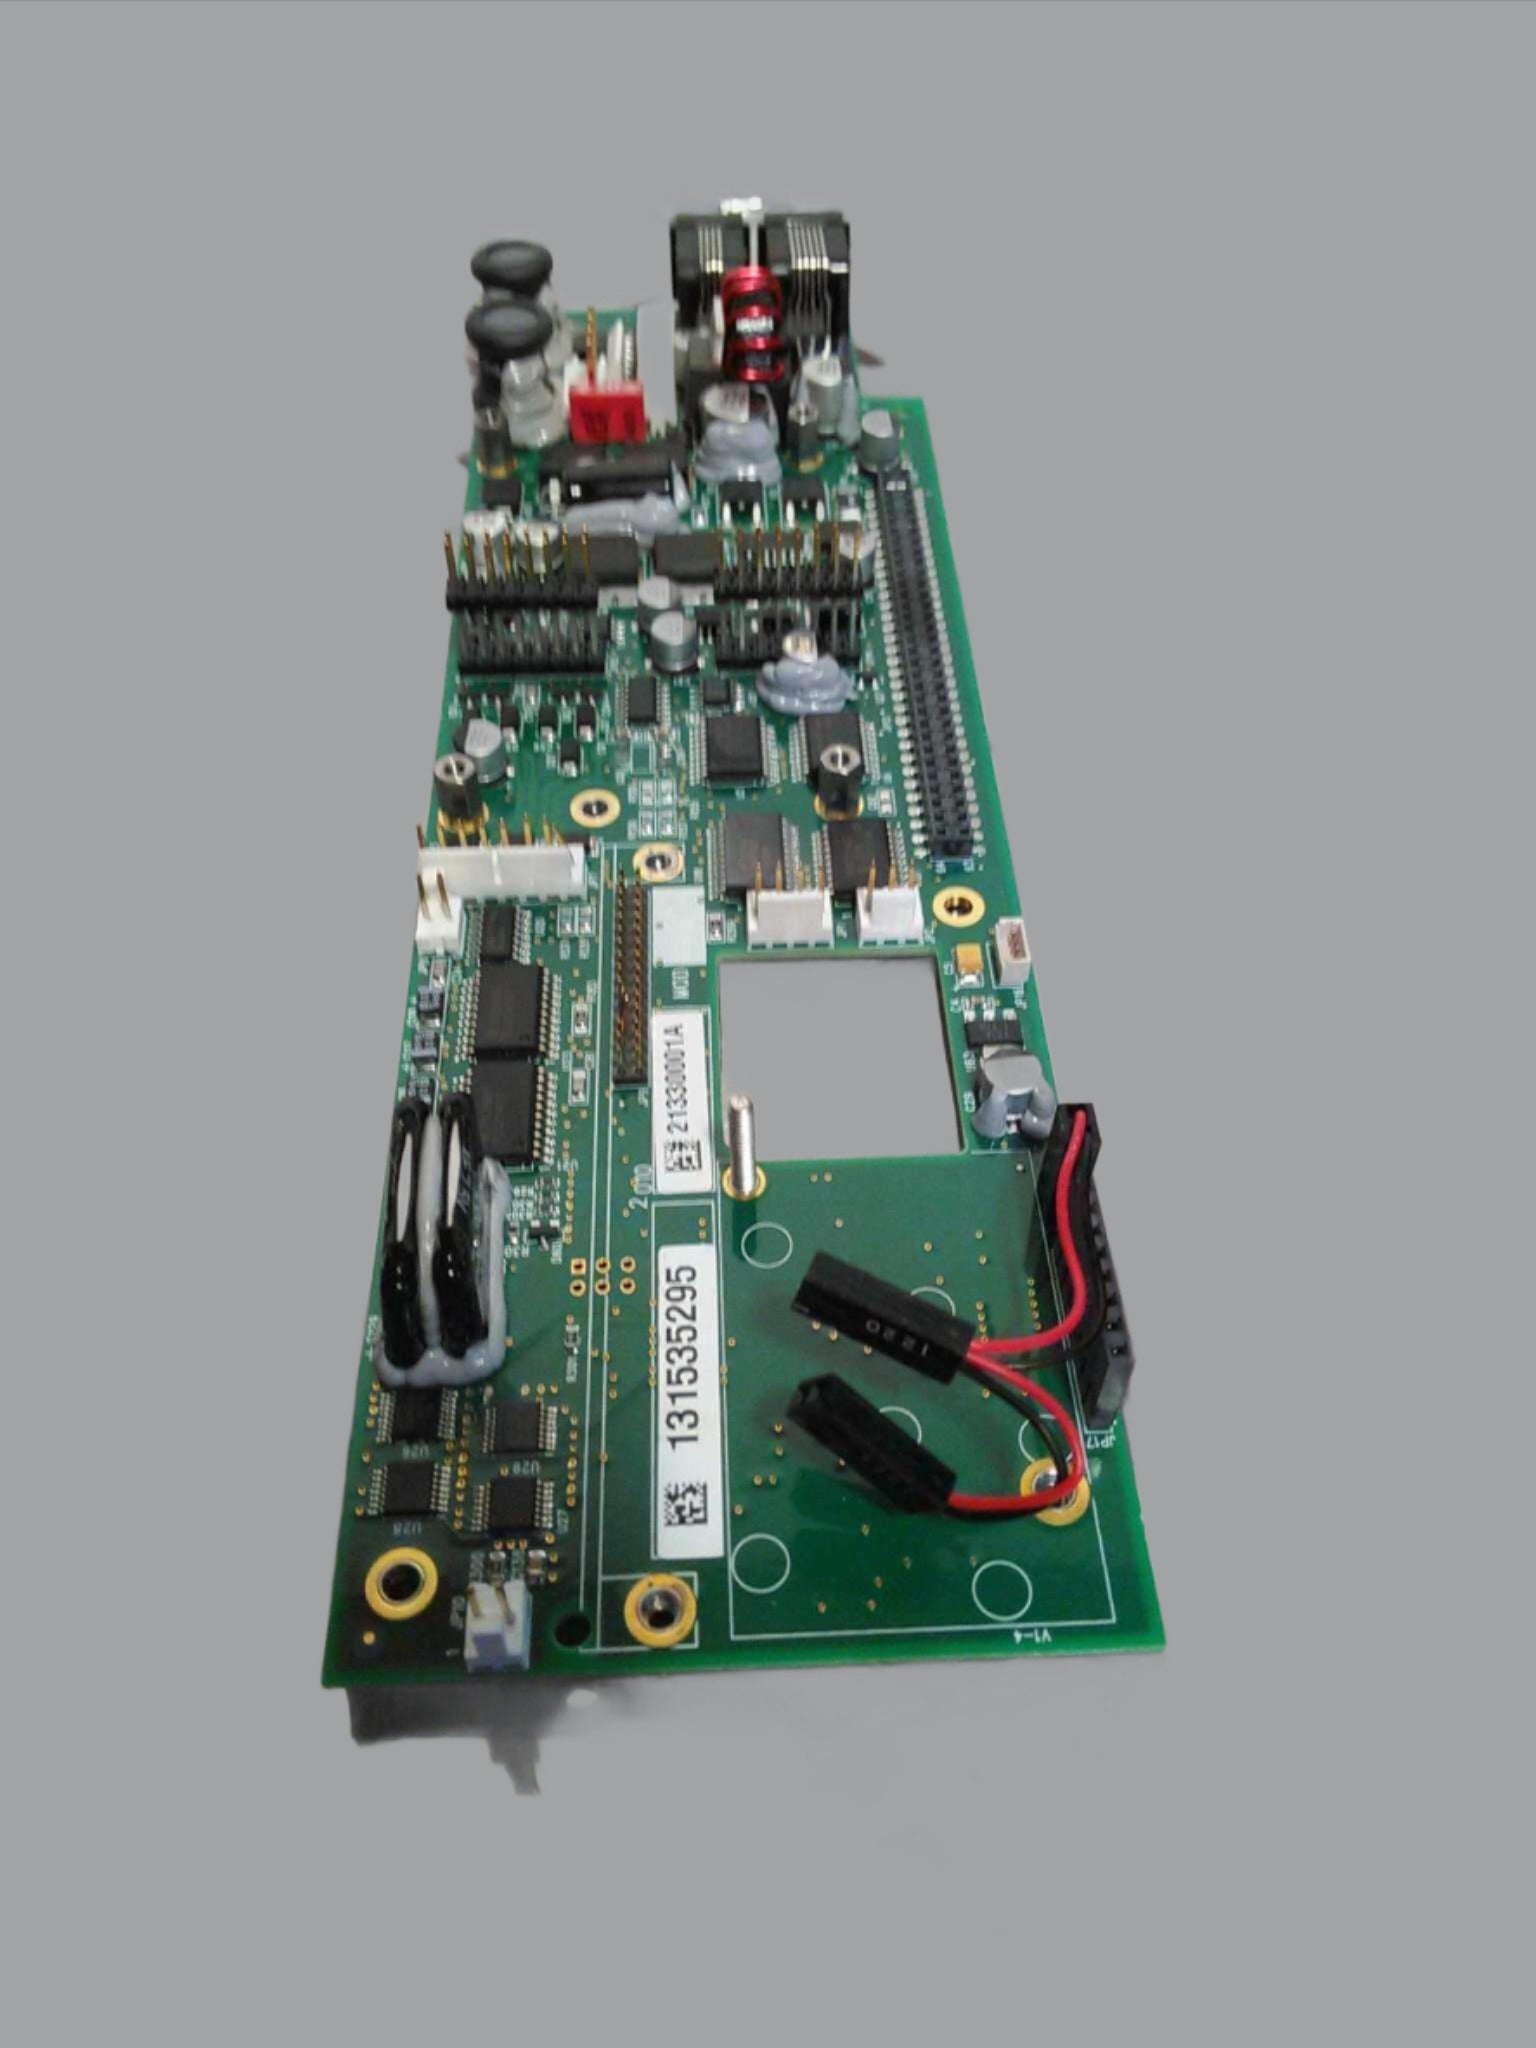 USED PCB Board Part of PM Kit For LTV-1000 LTV-950 Ventilator 21330001A Warranty FREE Shipping - MBR Medicals